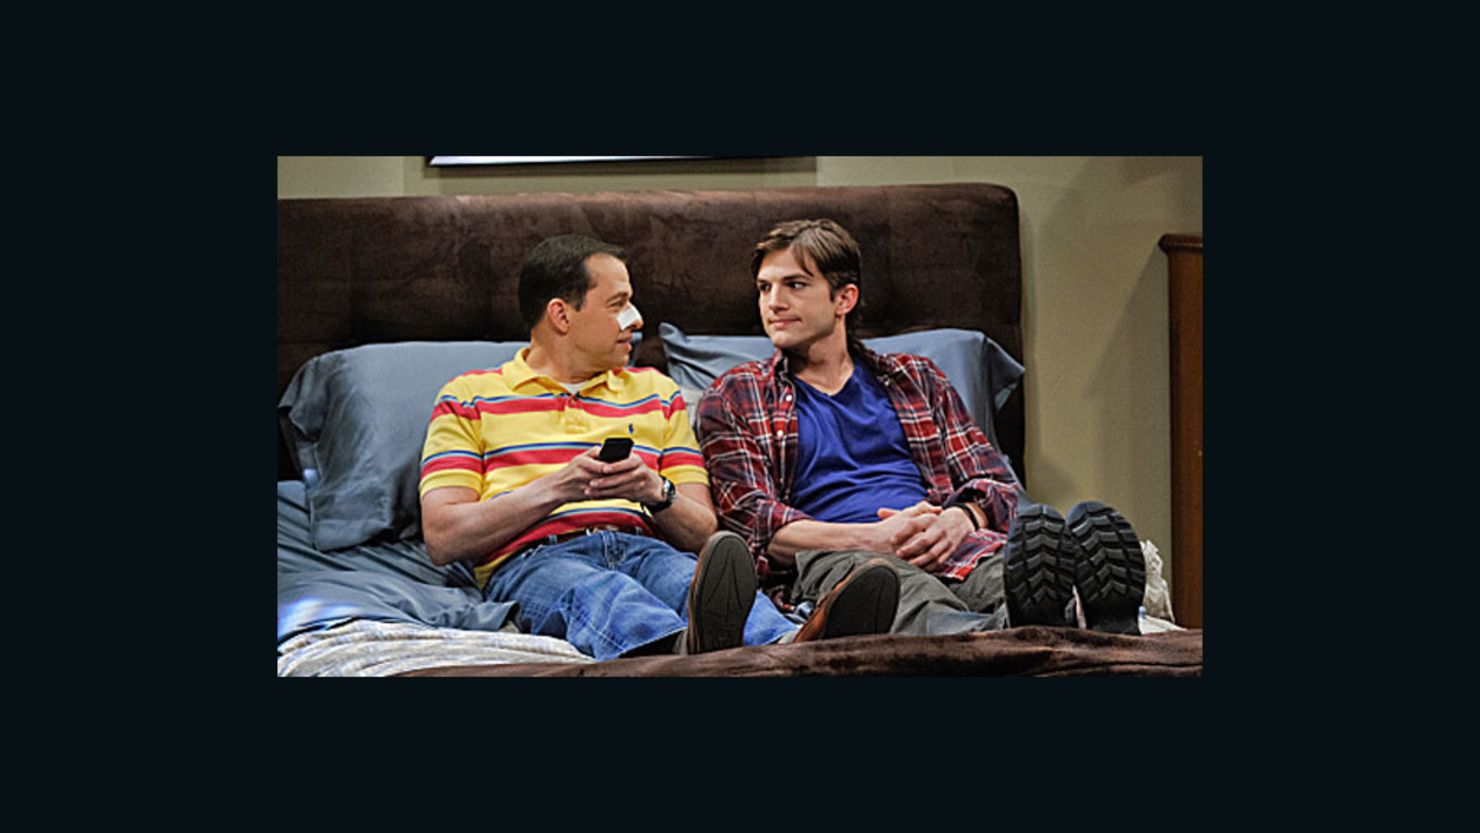 Ashton Kutcher, right, with co-star Jon Cryer, was on the set of "Two and a Half Men" when police were called to his house.